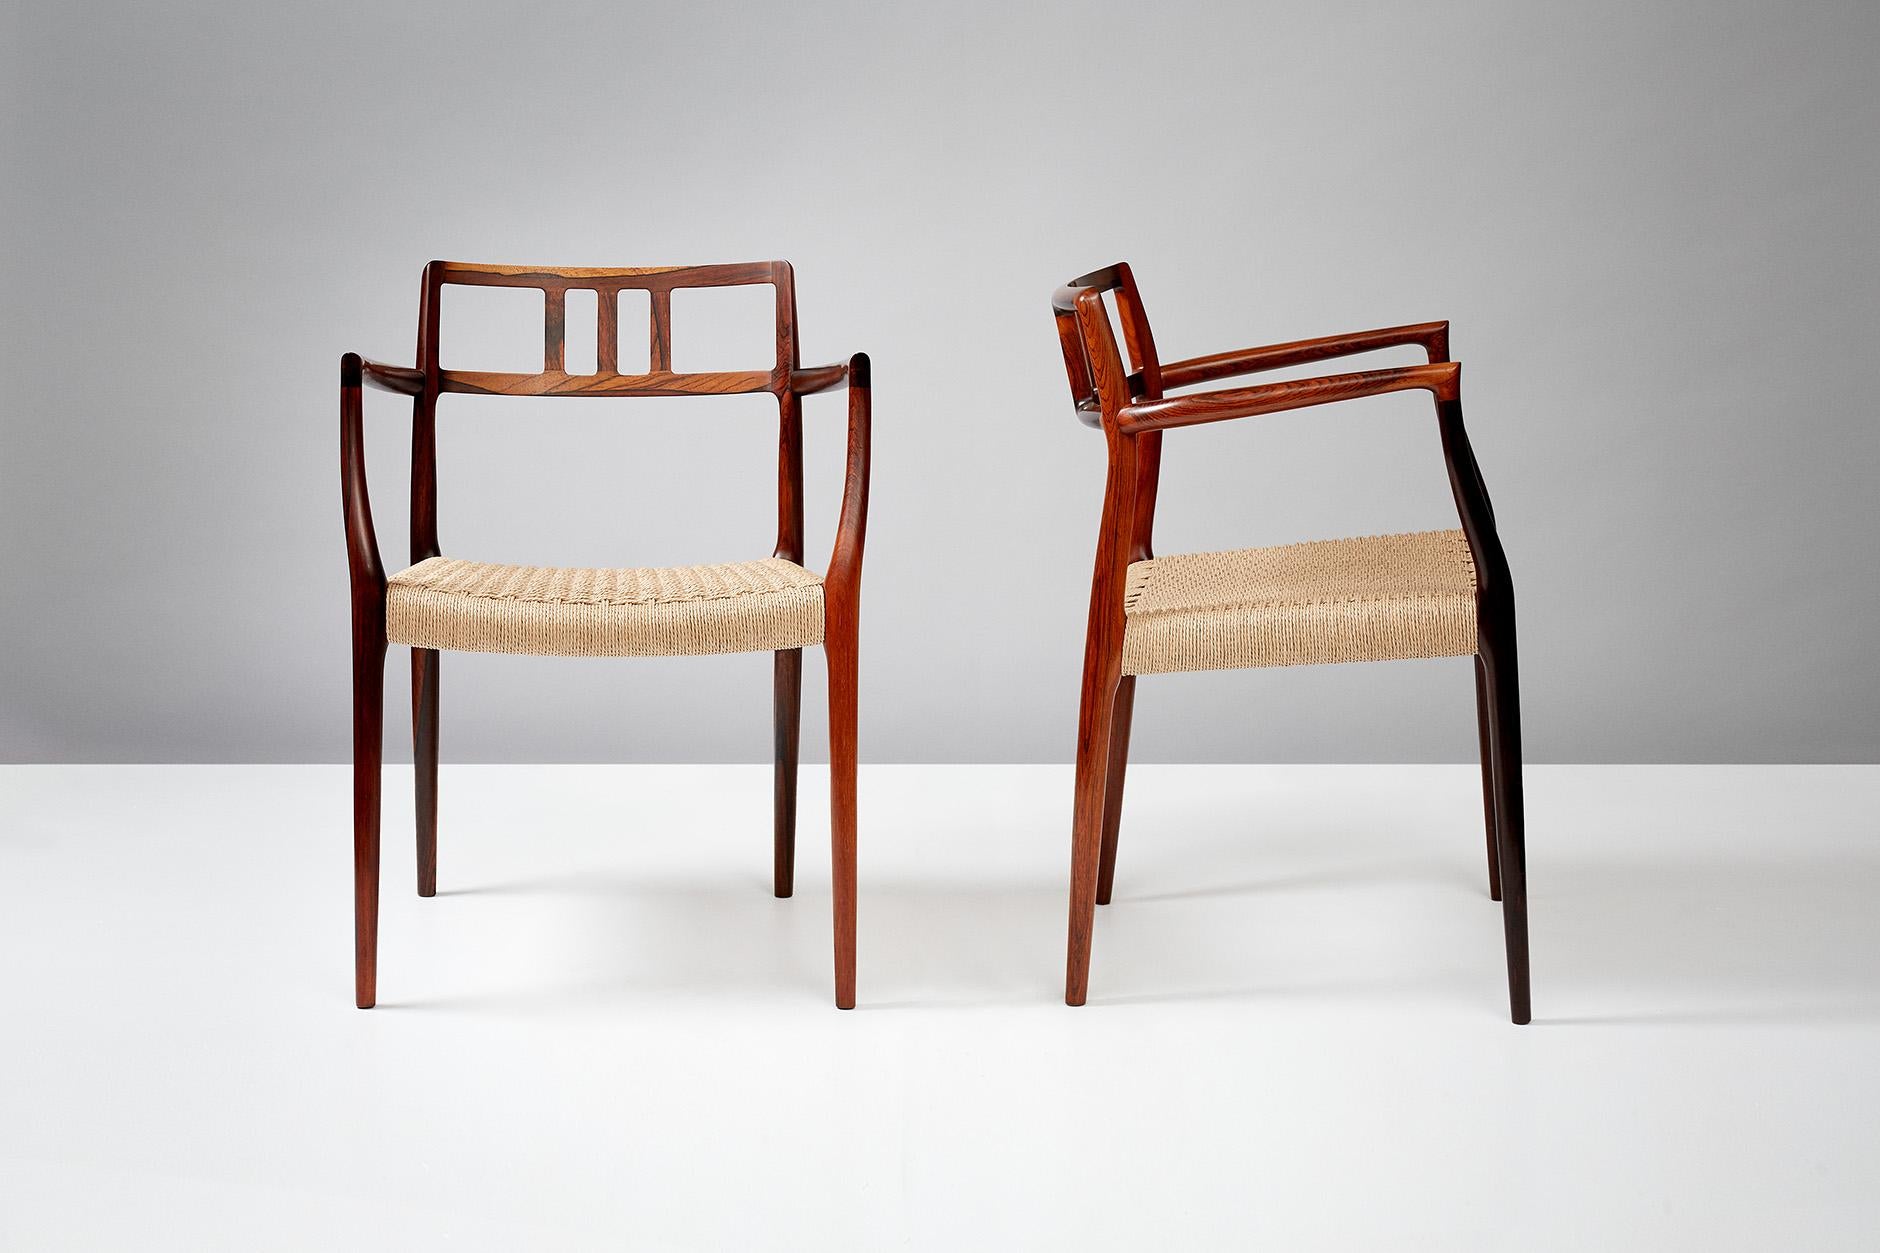 Niels Moller

Rosewood Model 64 armchairs, designed in 1966 by Niels Moller for his own workshop: J.L. Moller Mobelfabrik in Denmark. The seats have been newly woven in Danish papercord.